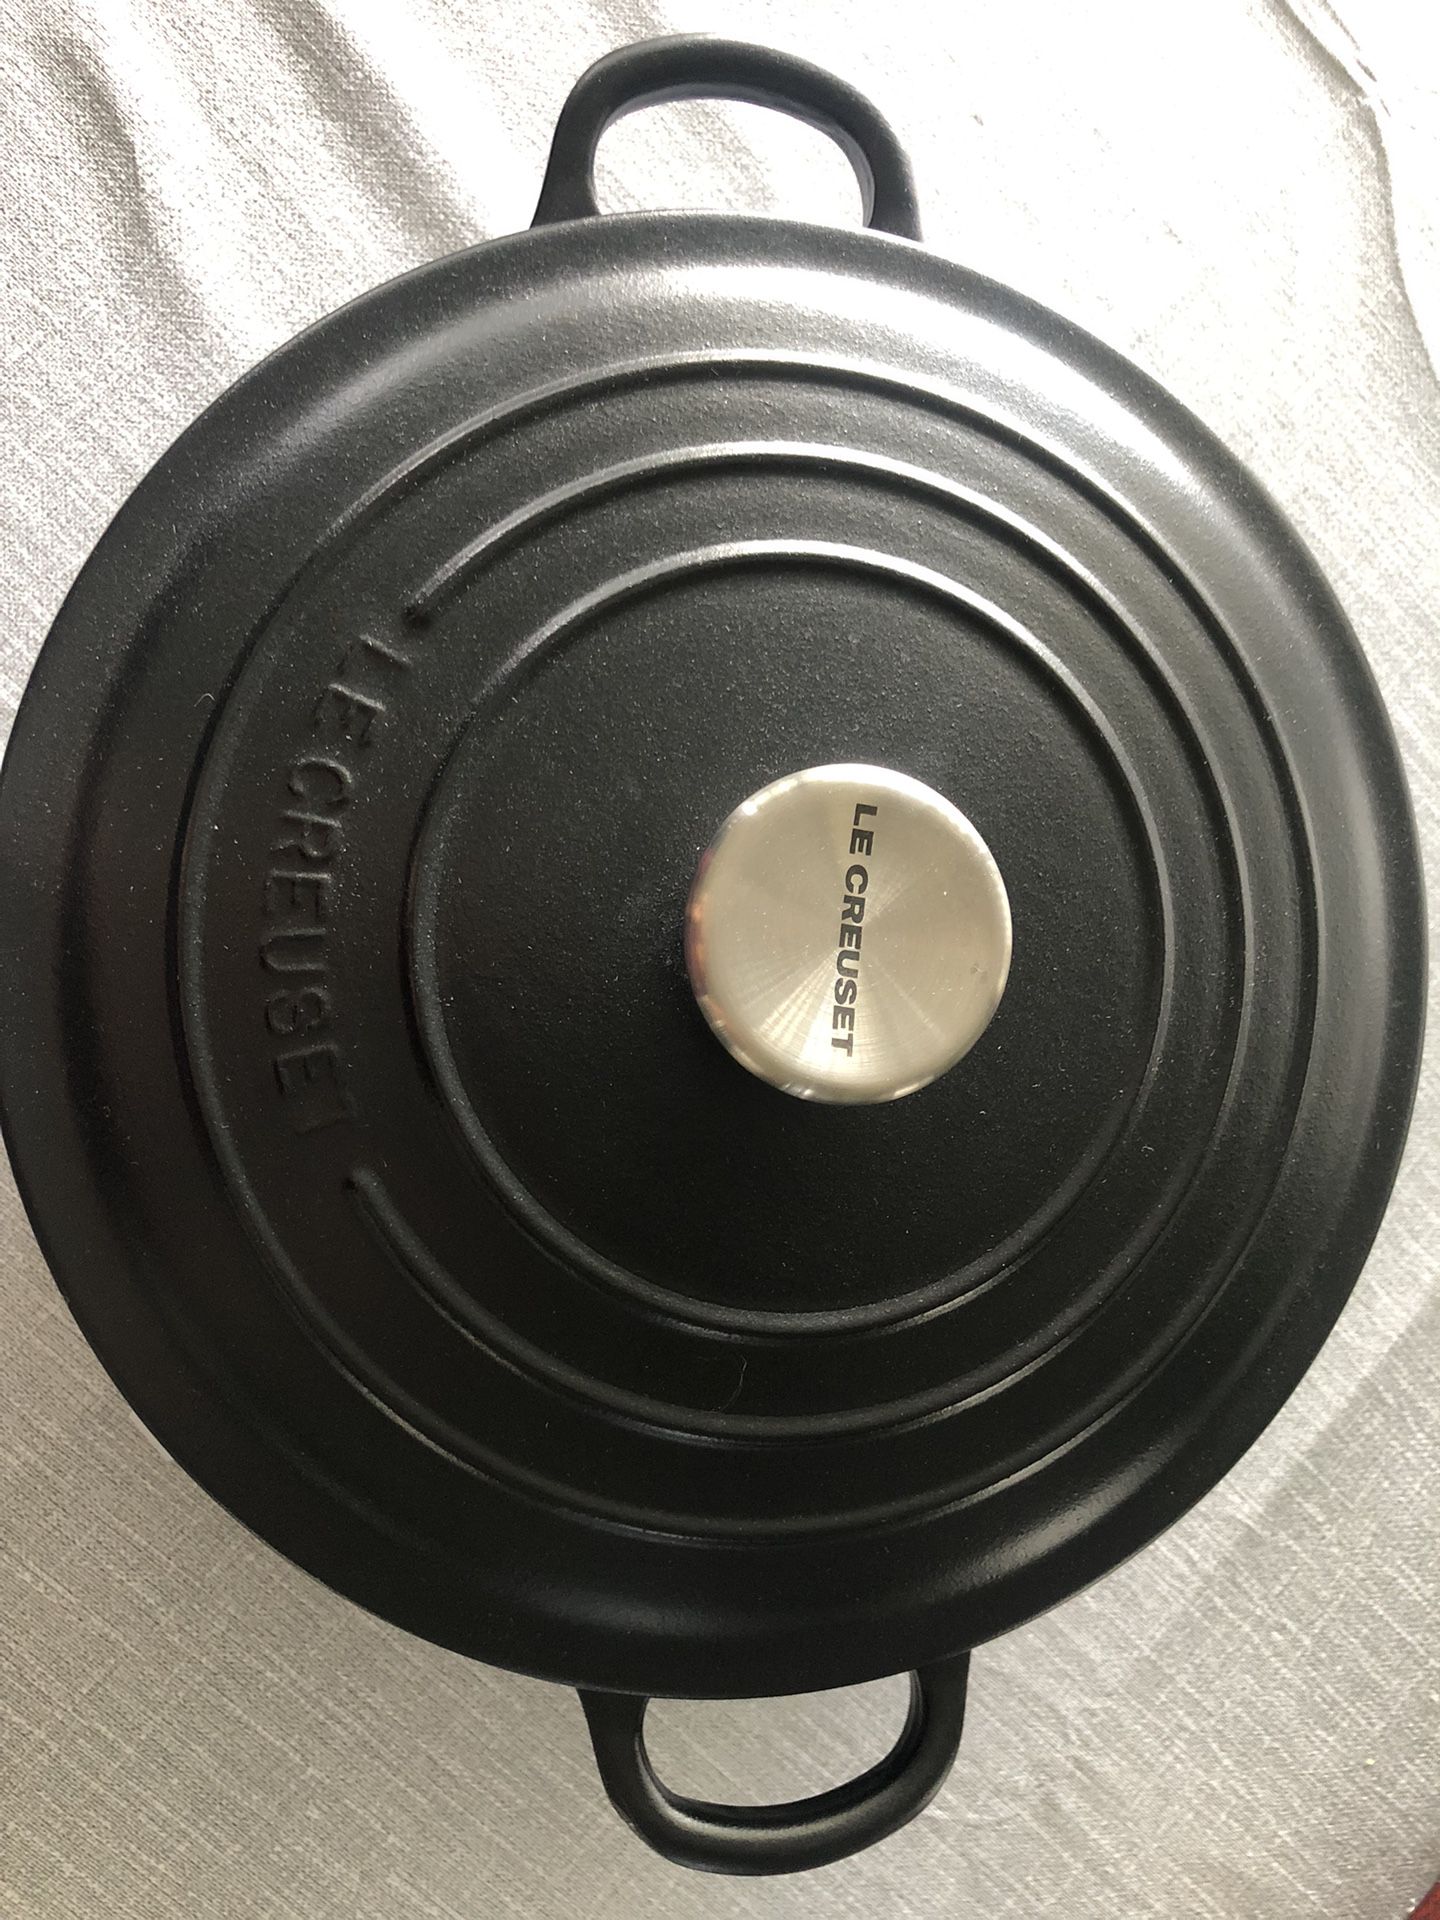 10-Qt. Dutch Oven for Sale in San Diego, CA - OfferUp